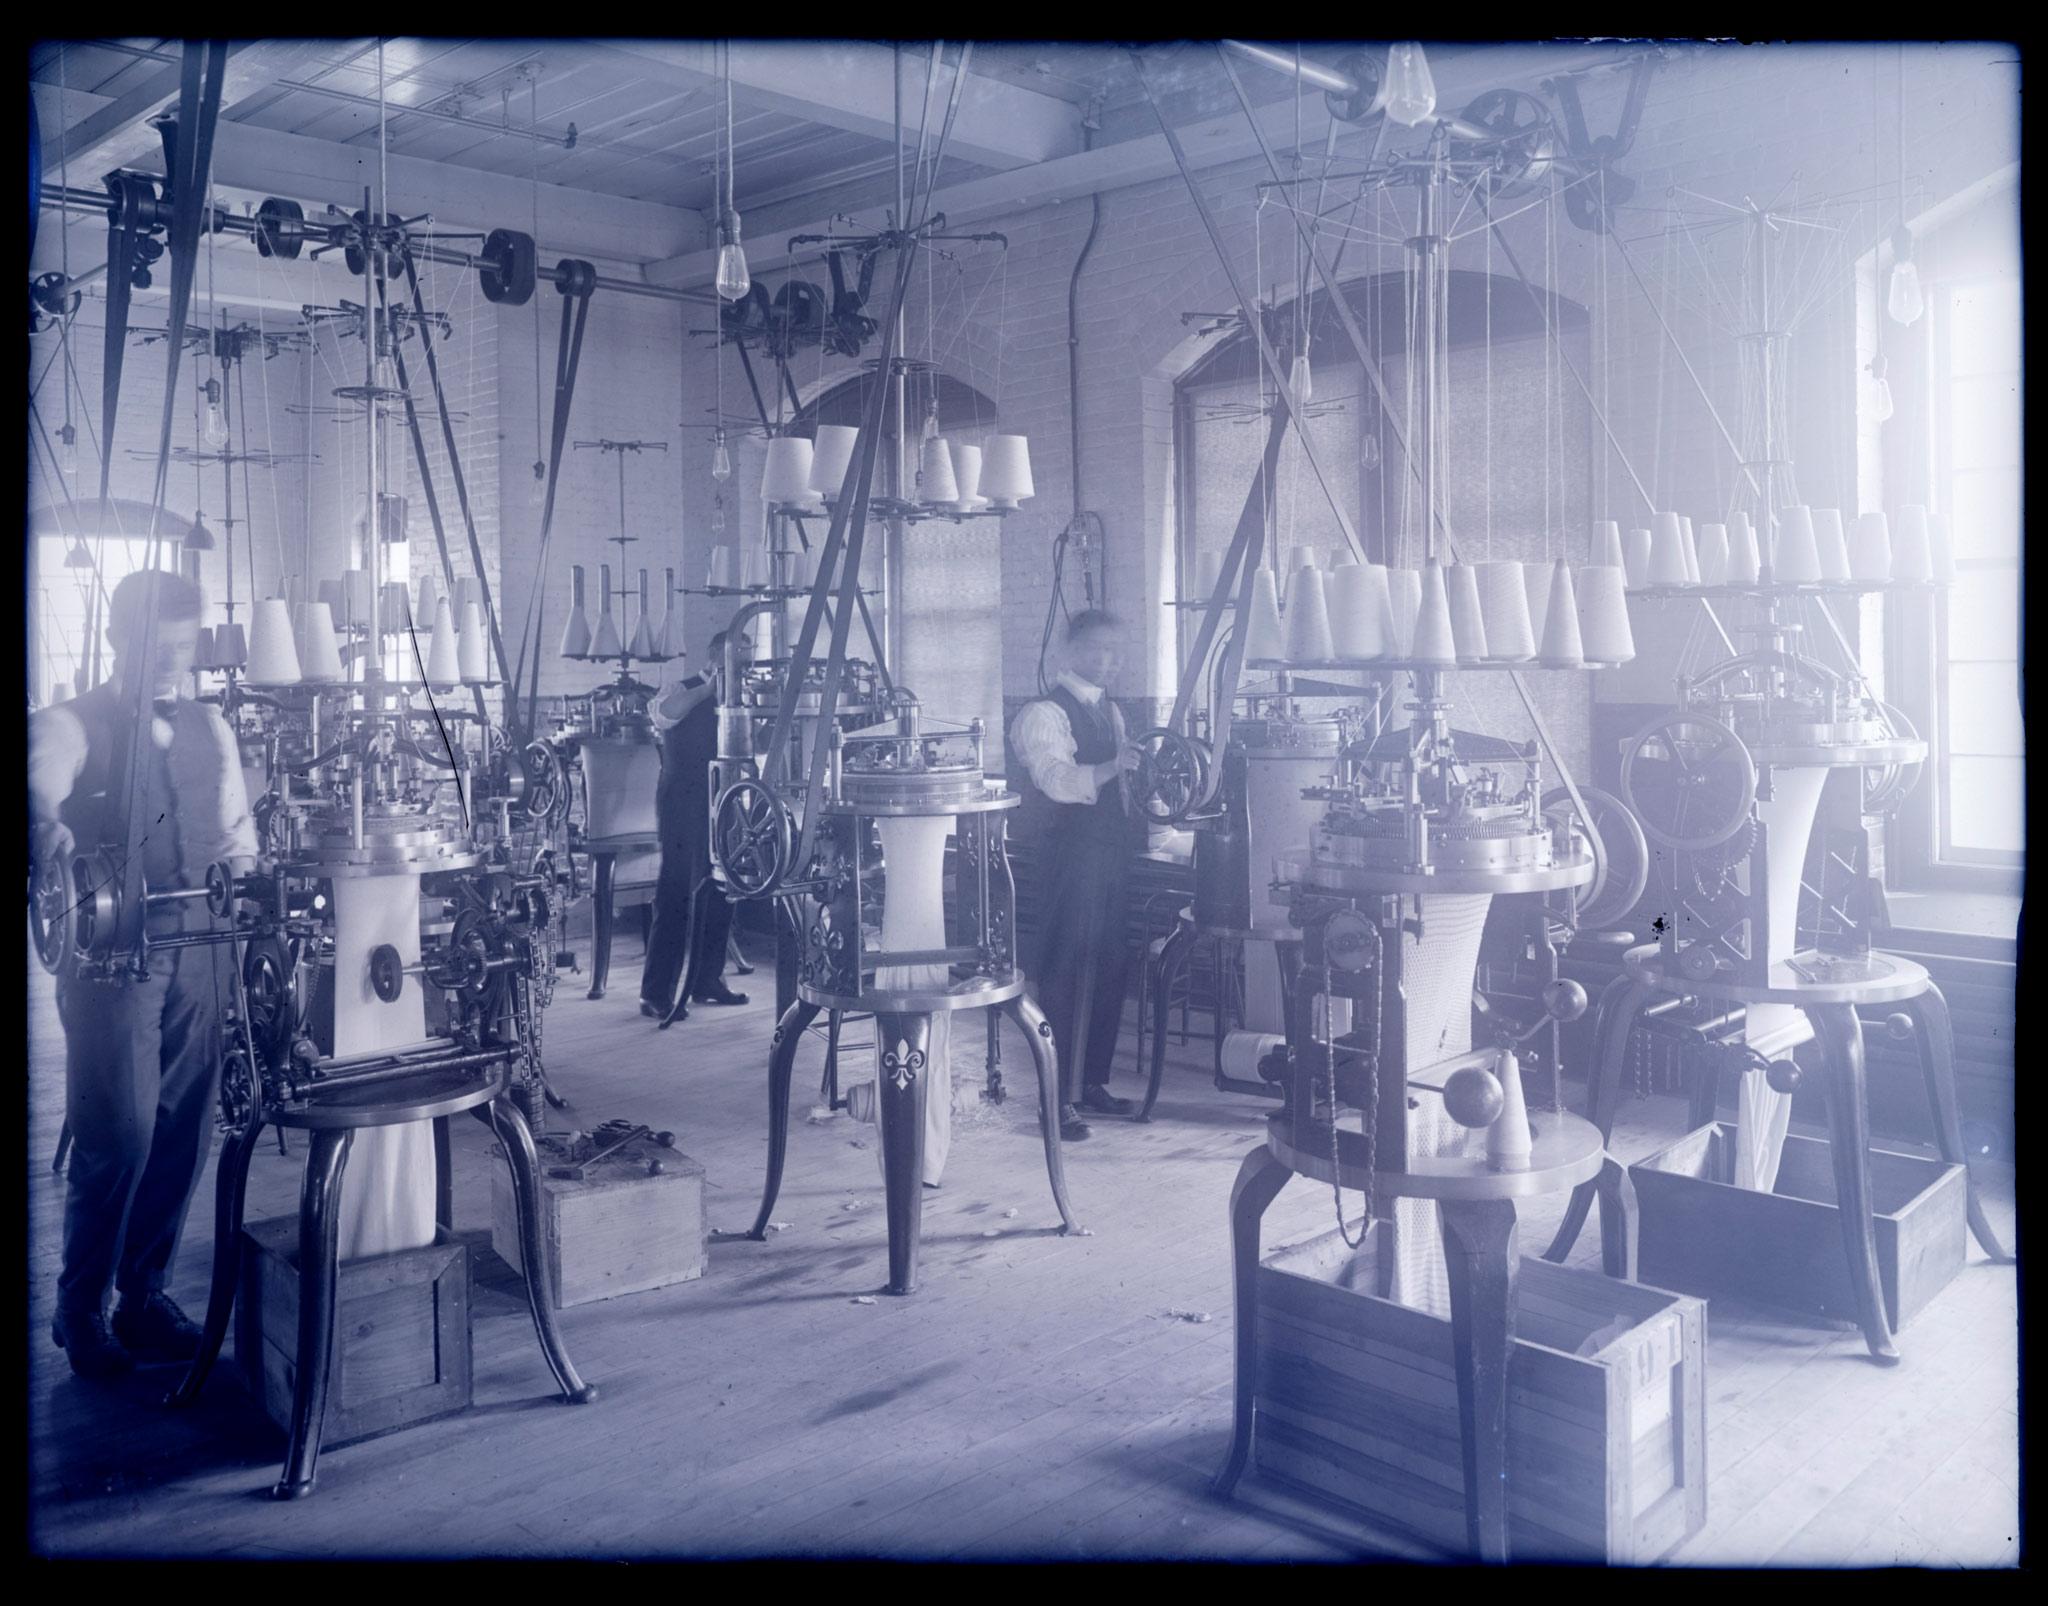 Knitting room of the New Bedford Textile School at the start of the twentieth century